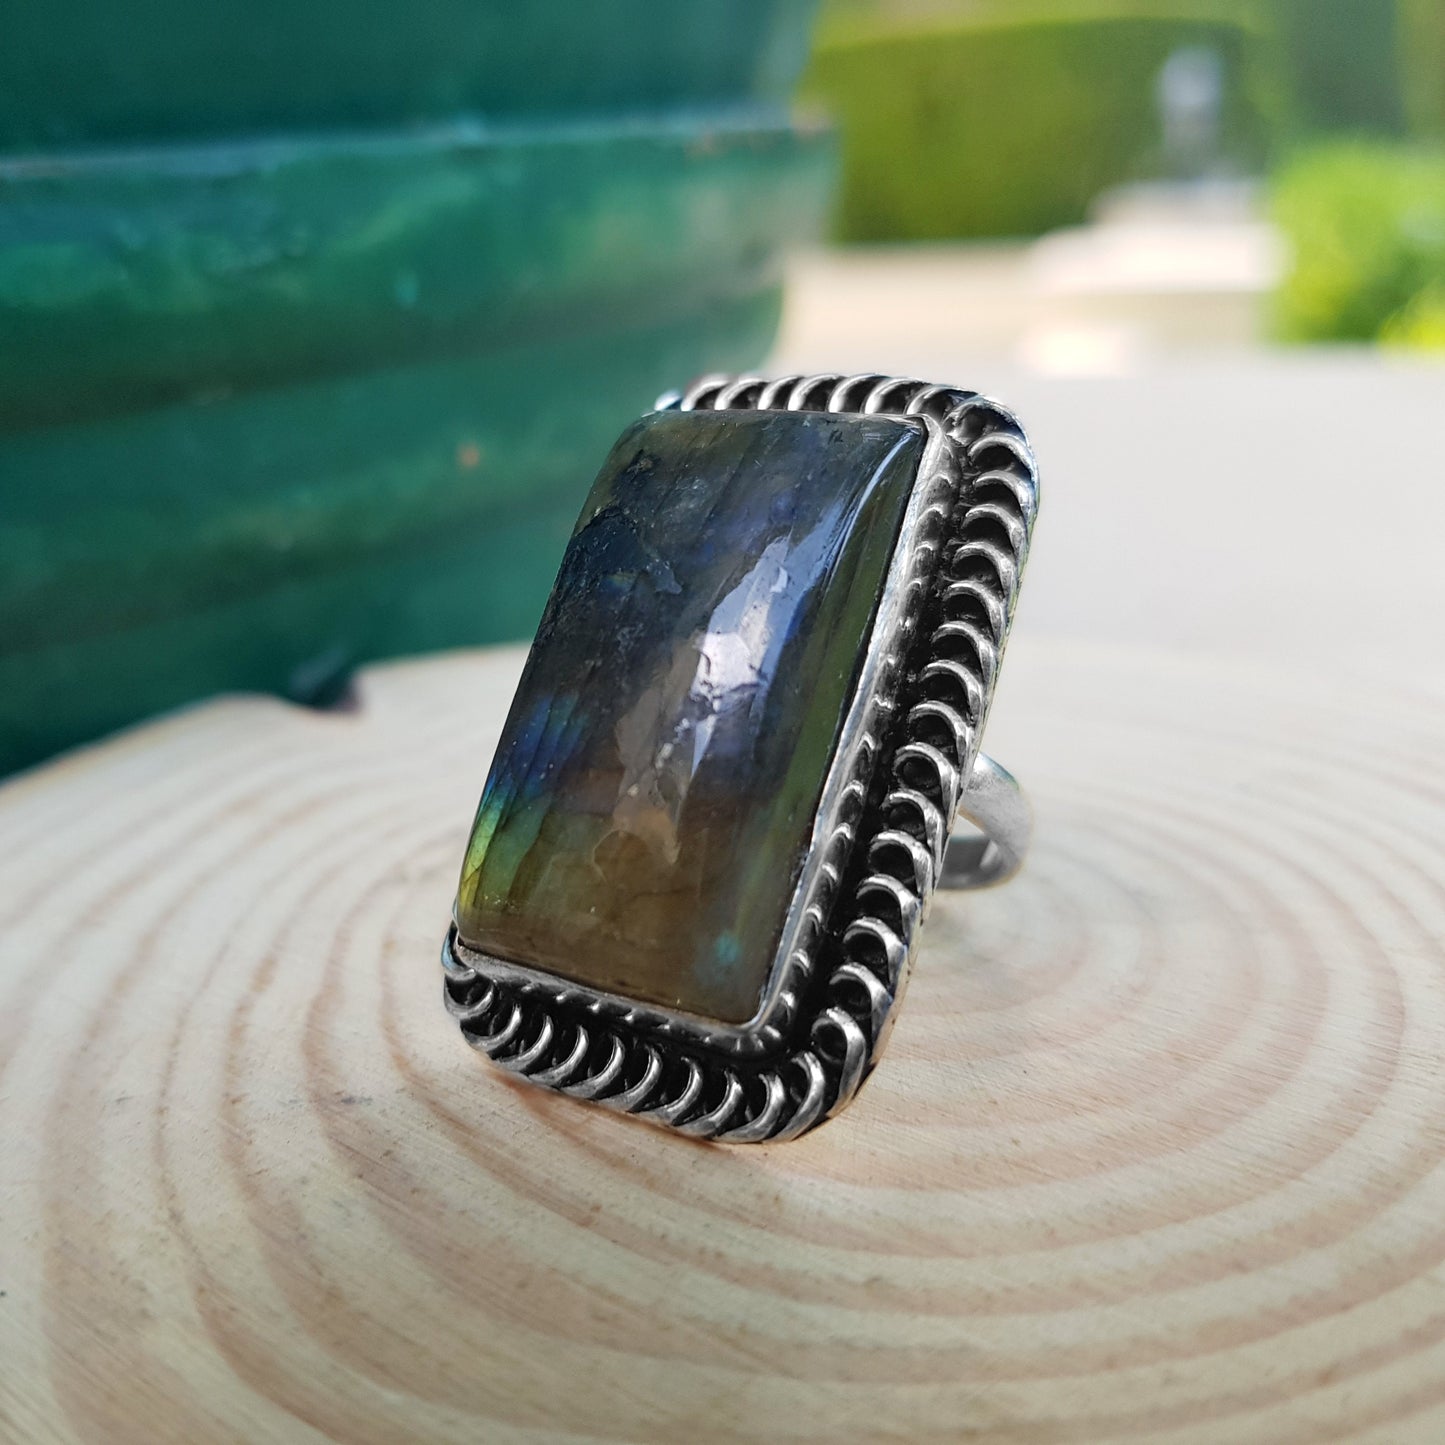 Labradorite Ring In Sterling Silver Size US 7 3/4 Boho Crystal Ring Unique Gift For Women GypsyJewelry